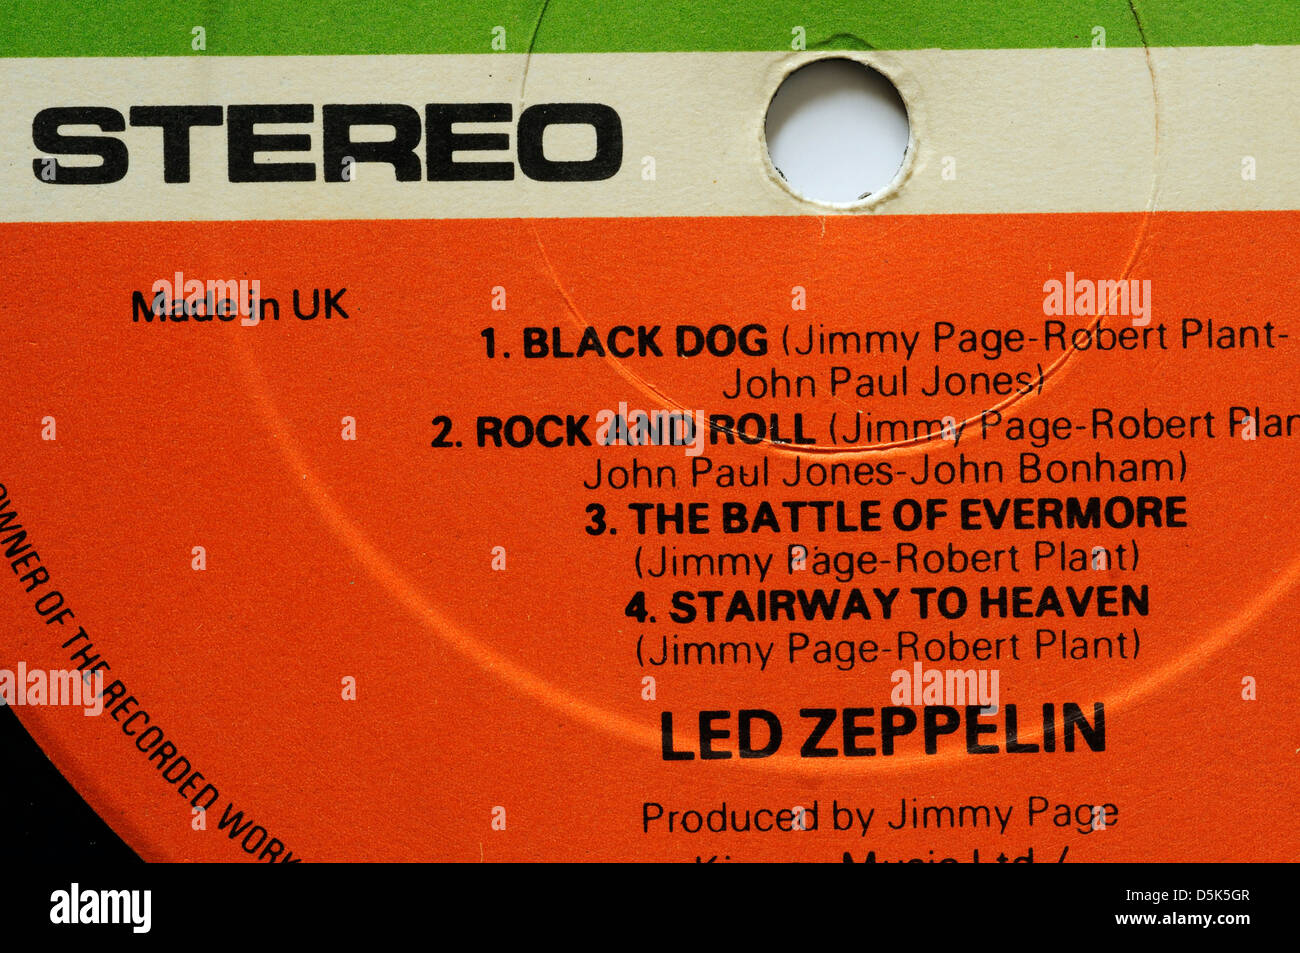 4 Led Zeppelin record label avec morceaux Rock and Roll et Stairway To Heaven Banque D'Images